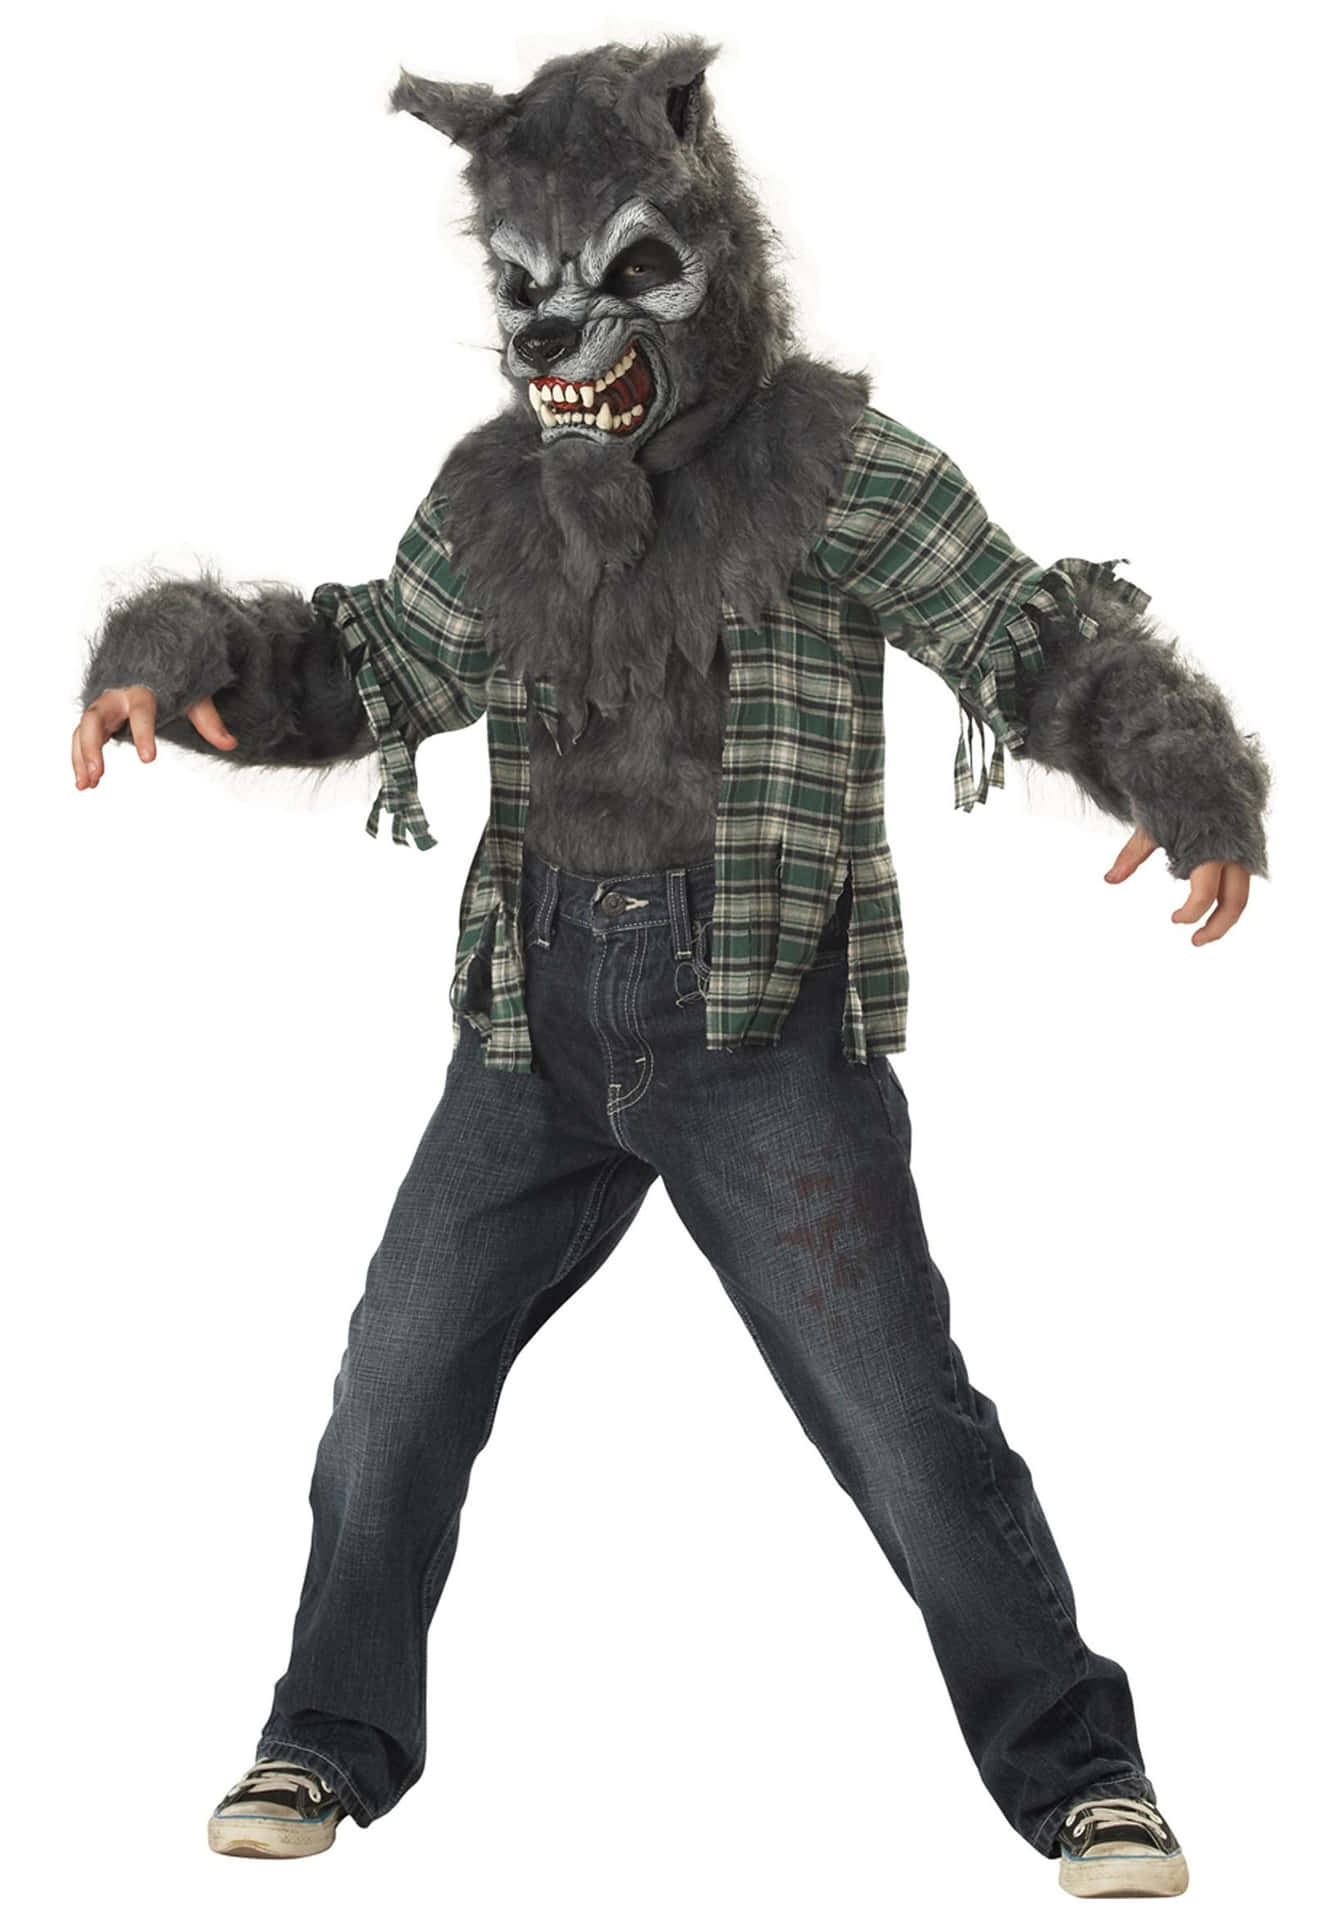 Frightening Werewolf Costume Unleashes the Beast Within Wallpaper